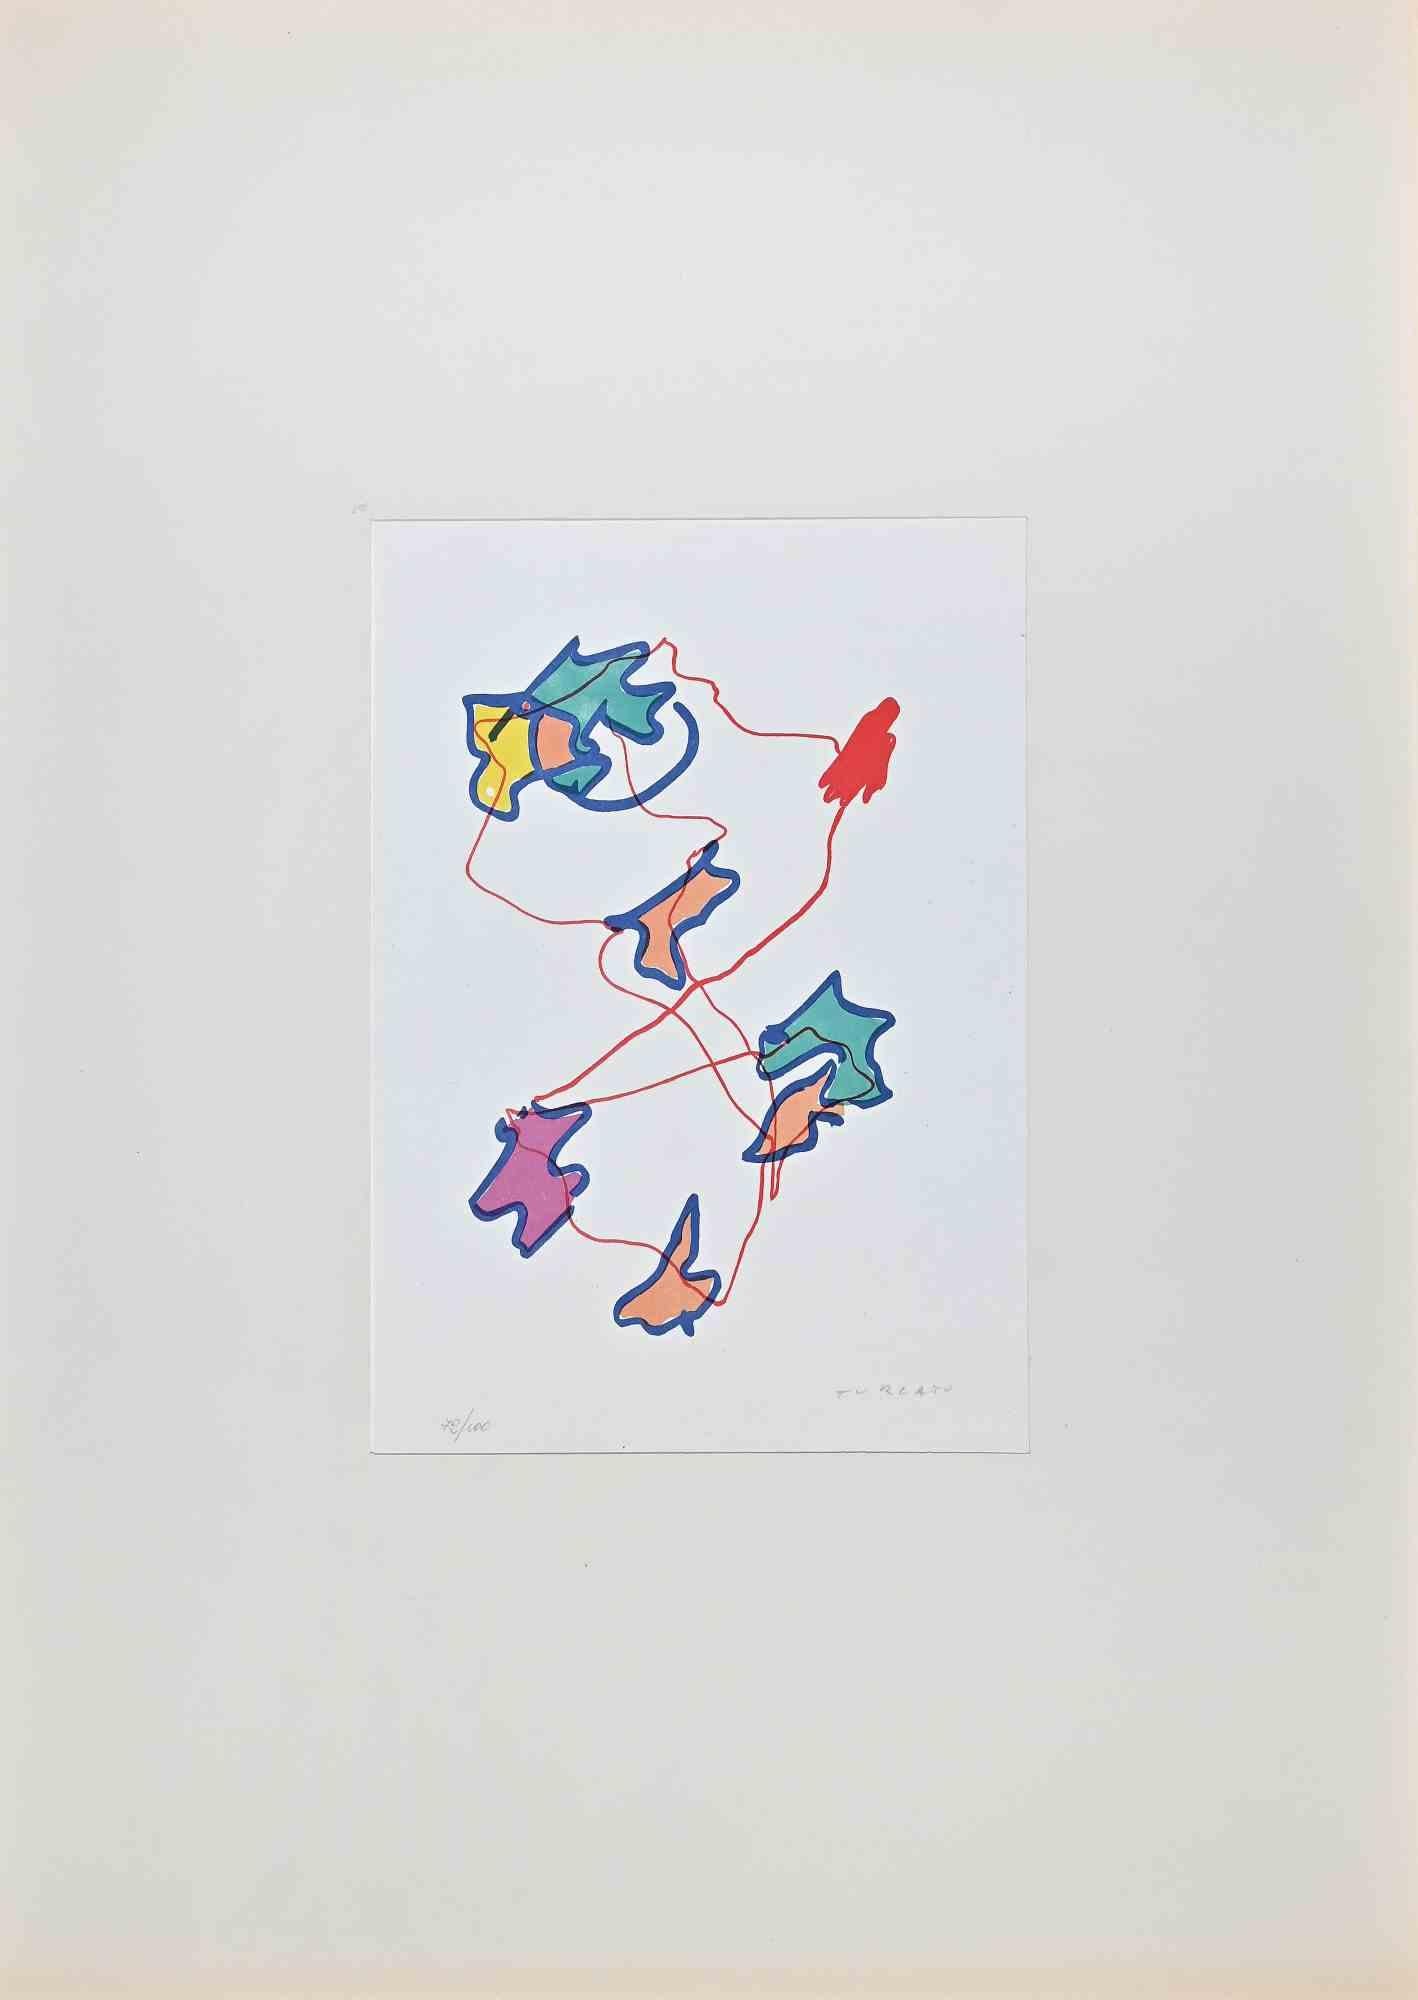 Abstract Composition is a colored lithograph print realized by the contemporary artist Giulio Turcato in 1973.

Hand-signed in pencil on the lower right.

Numbered on the lower margin, edition 72/100.

Authenticity label of La Nuova Foglio on the